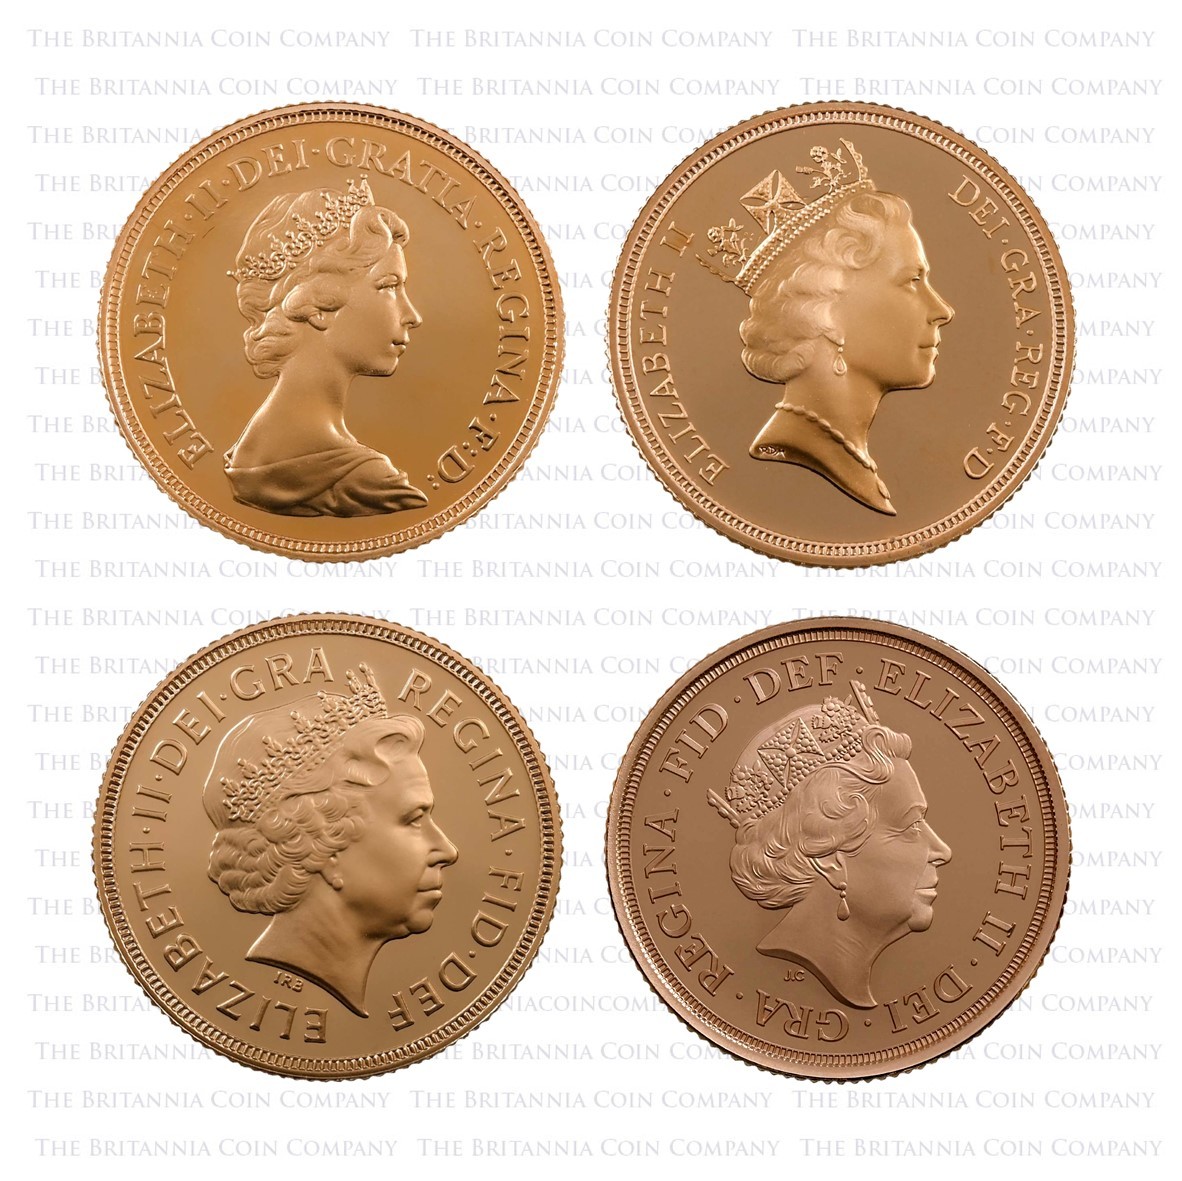 Portraits featured on gold proof Sovereigns during the reign of Elizabeth II.